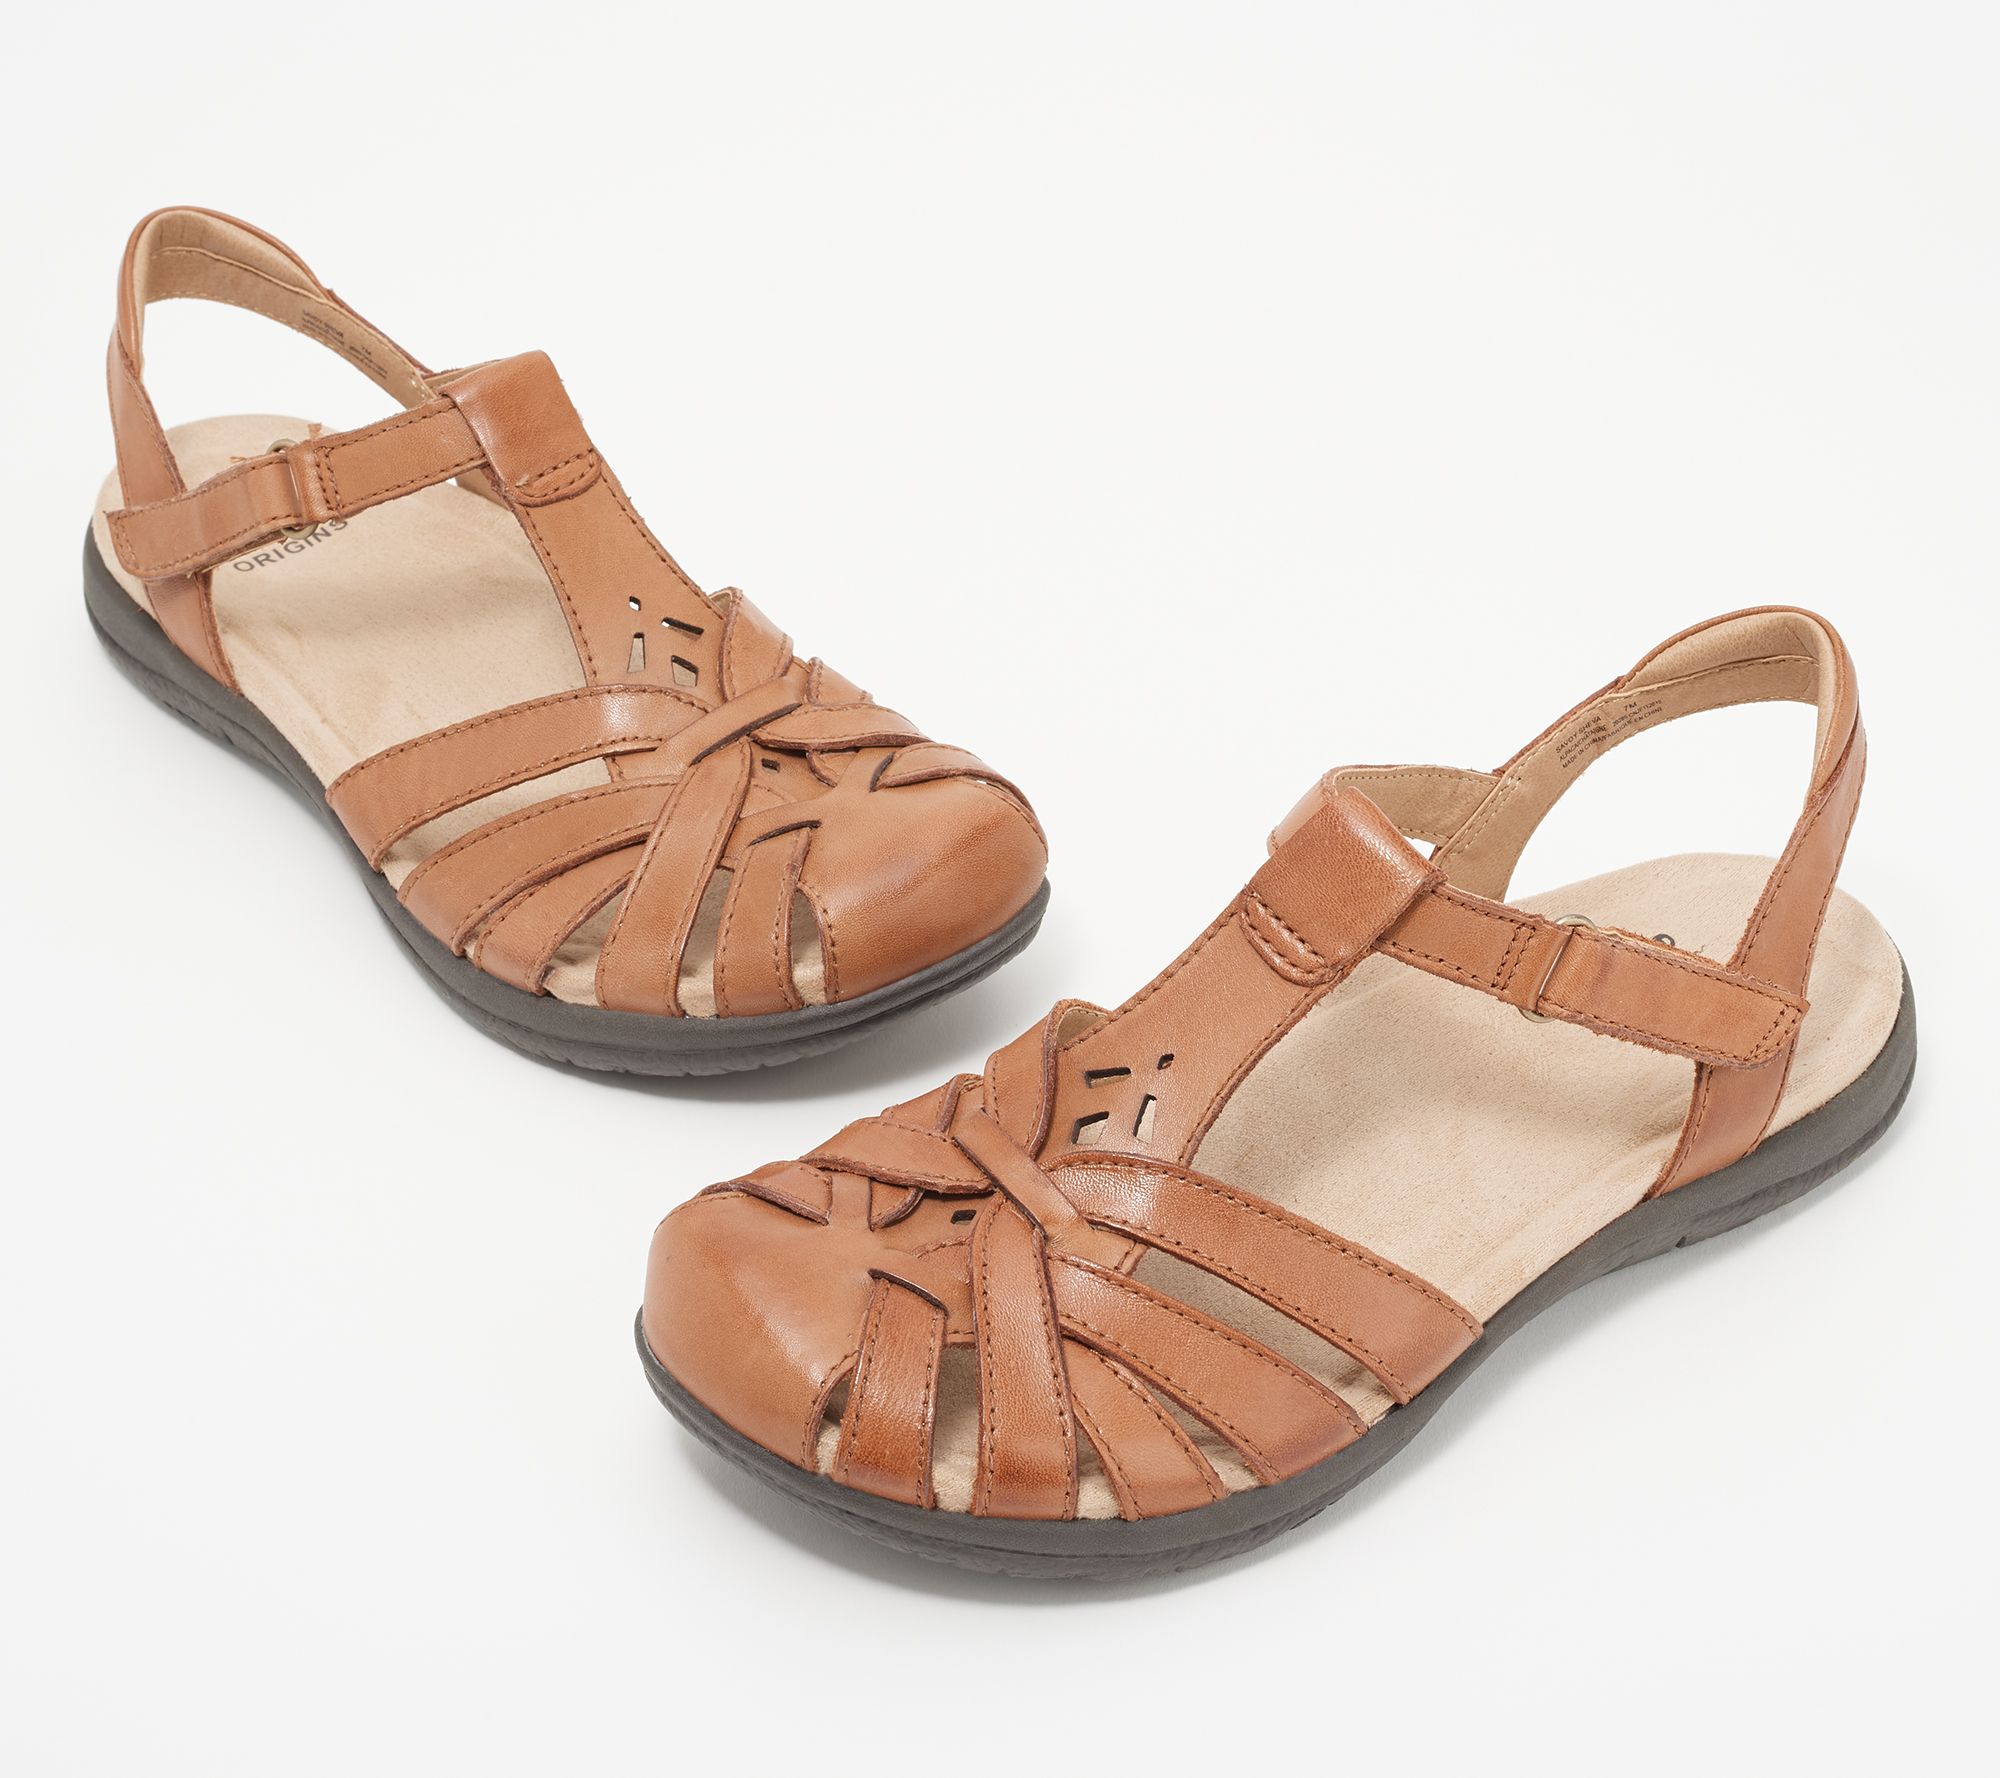 earth leather sandals